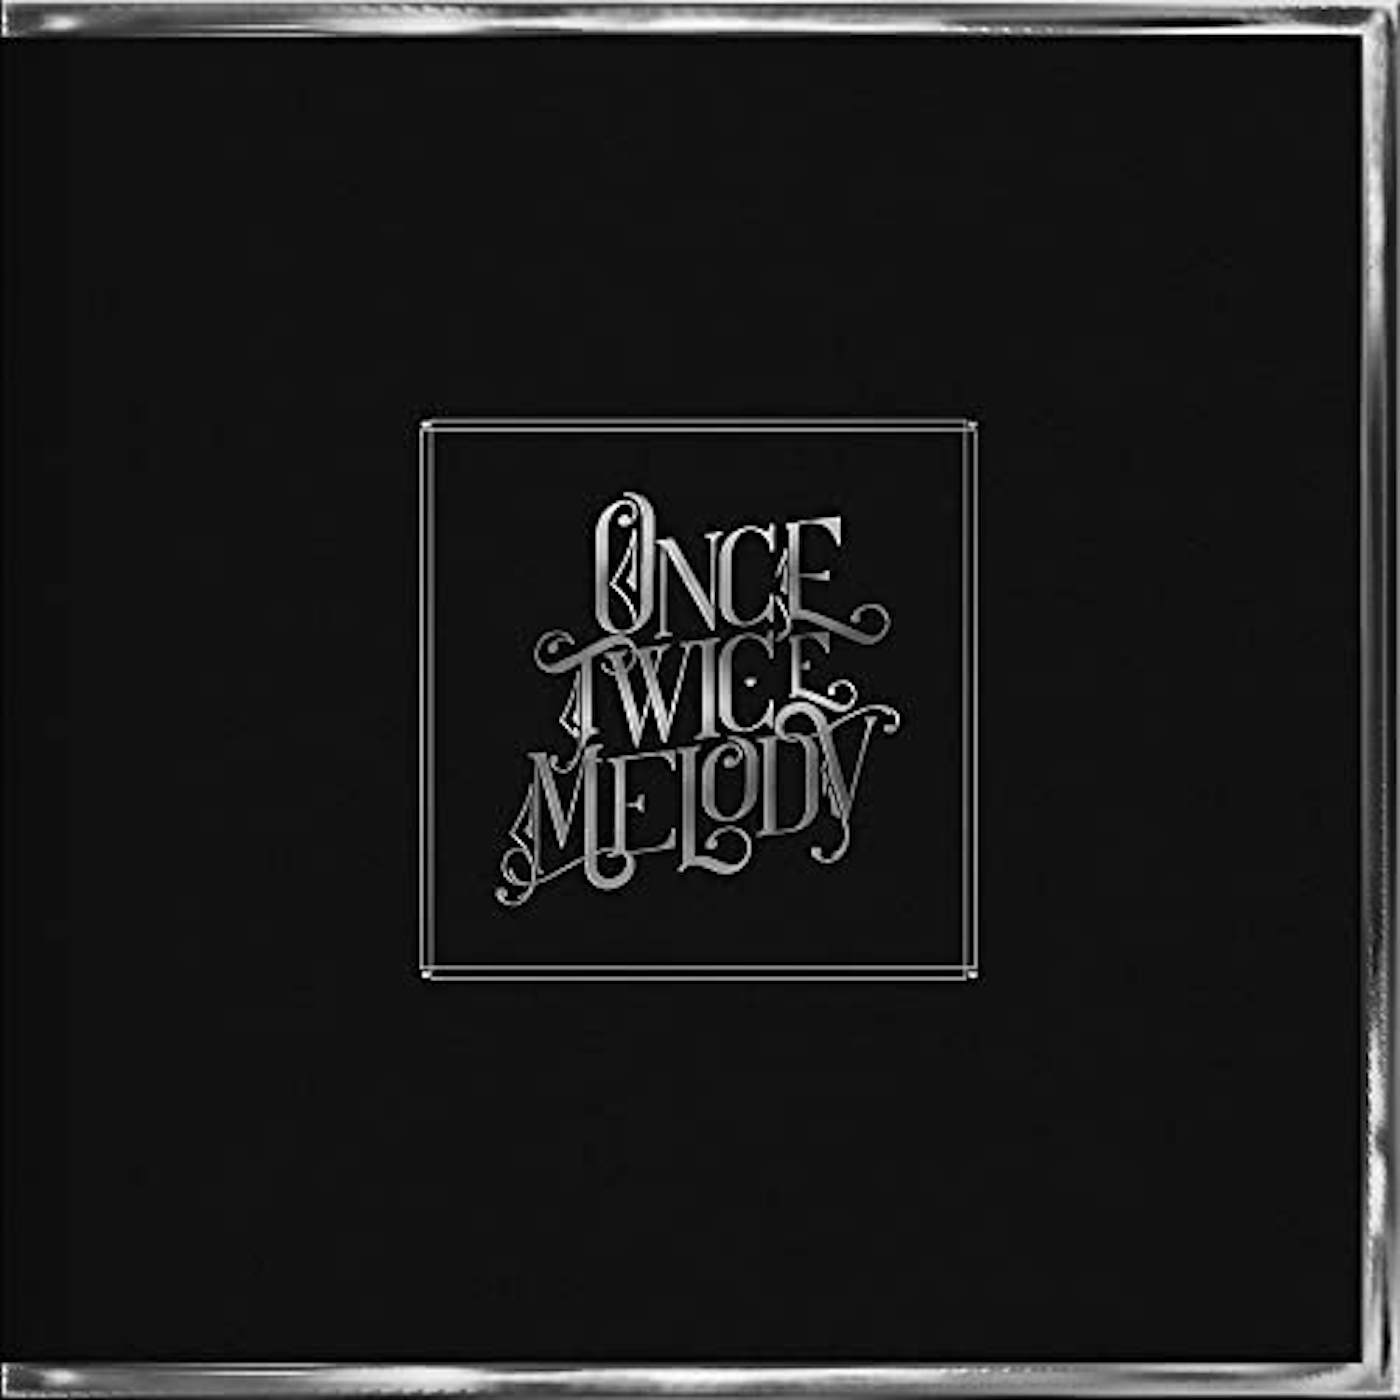 Beach House ONCE TWICE MELODY (SILVER EDITION) Vinyl Record